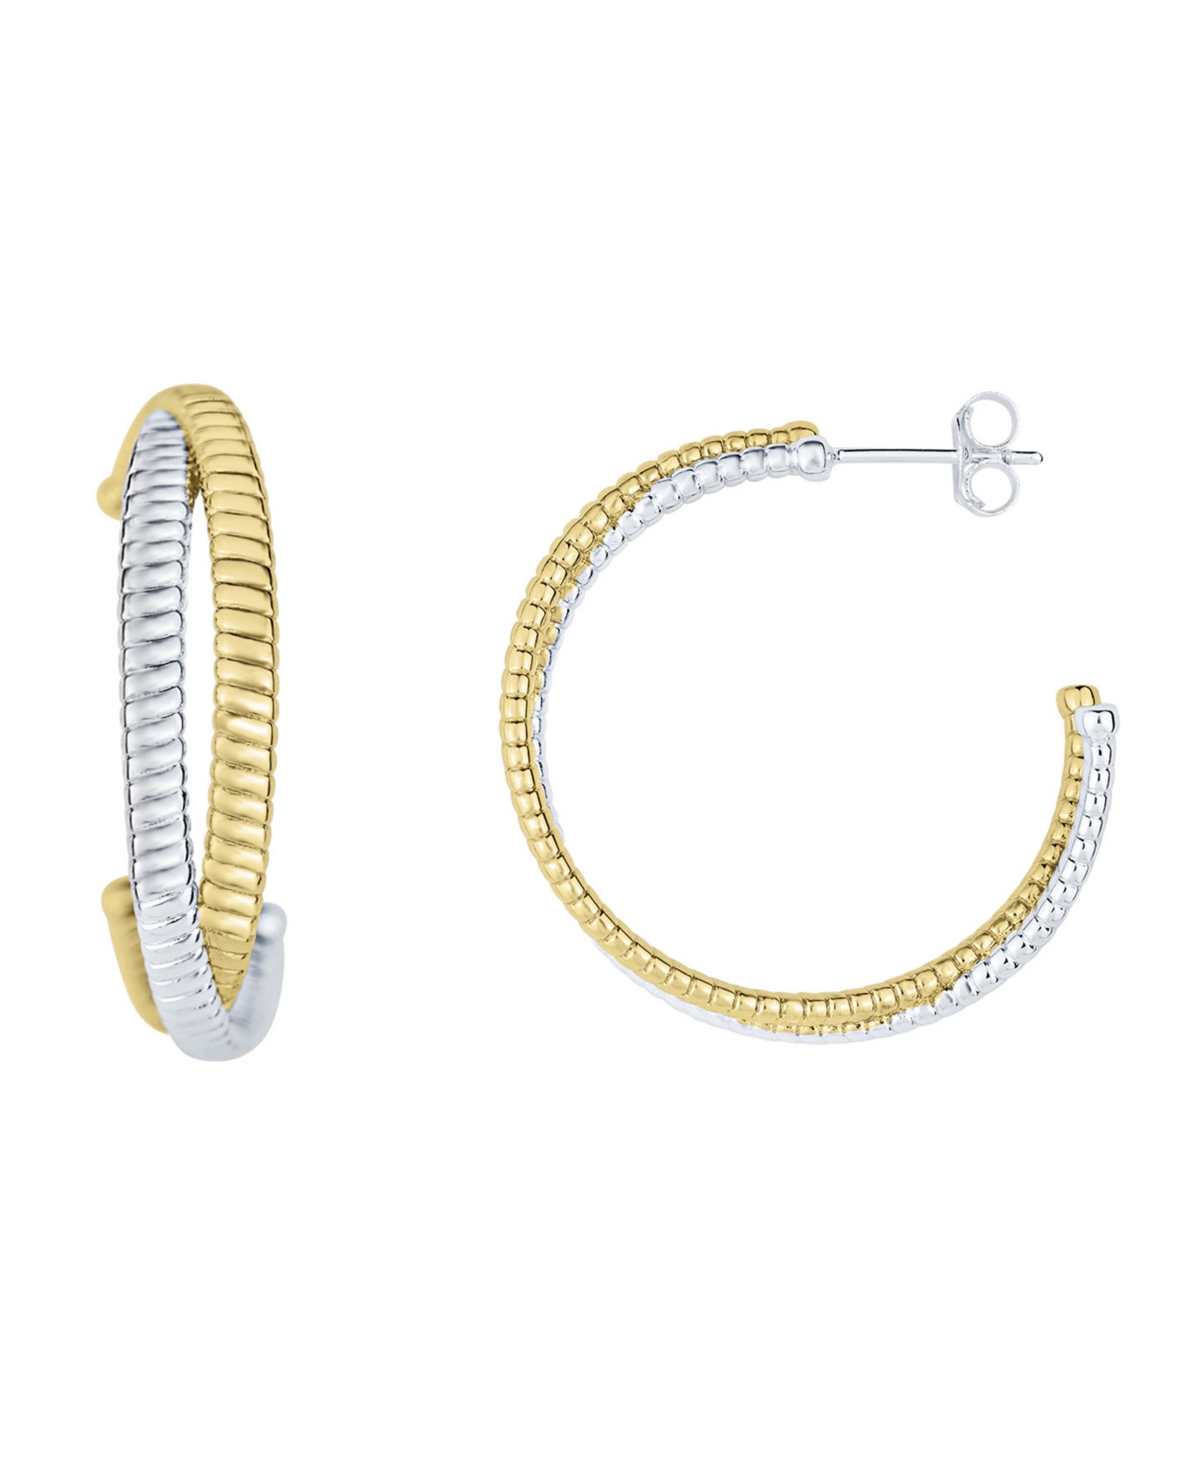 Silver Plated And 18K Gold Plated Textured Hoop Earring - Silver Plated and K Gold Plated Over Bra